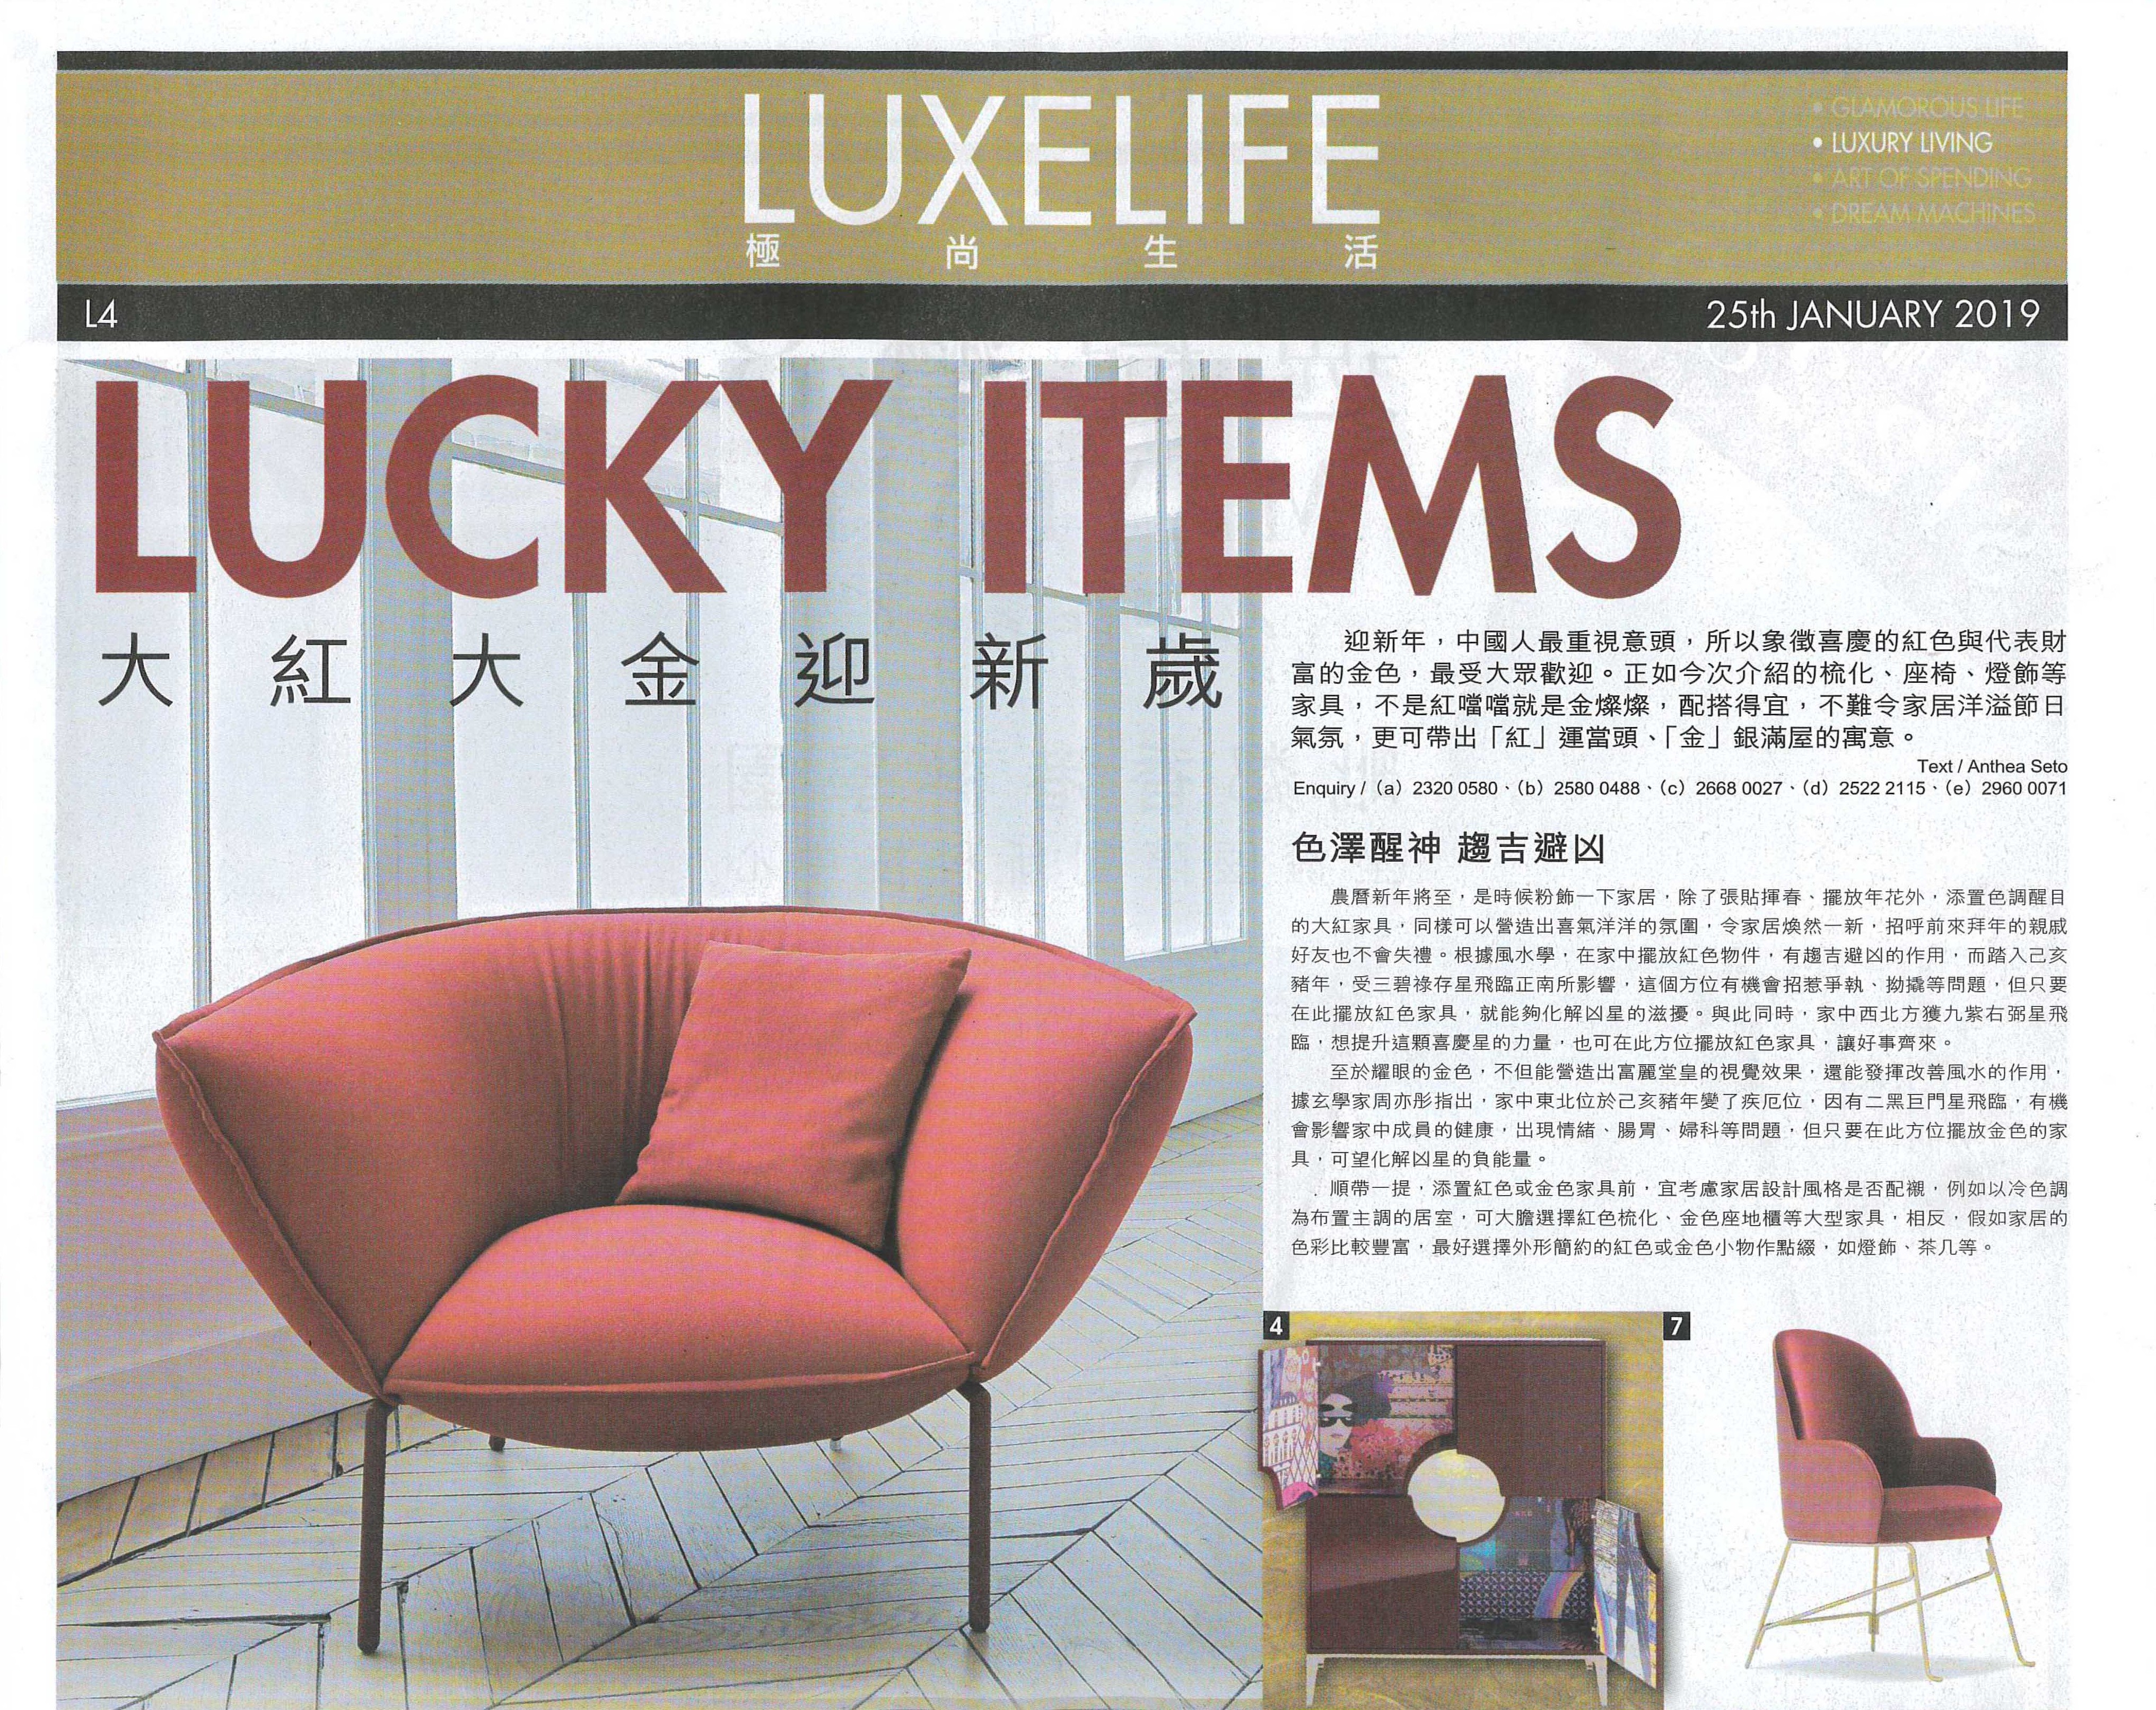 Oriental Daily – Luxelife